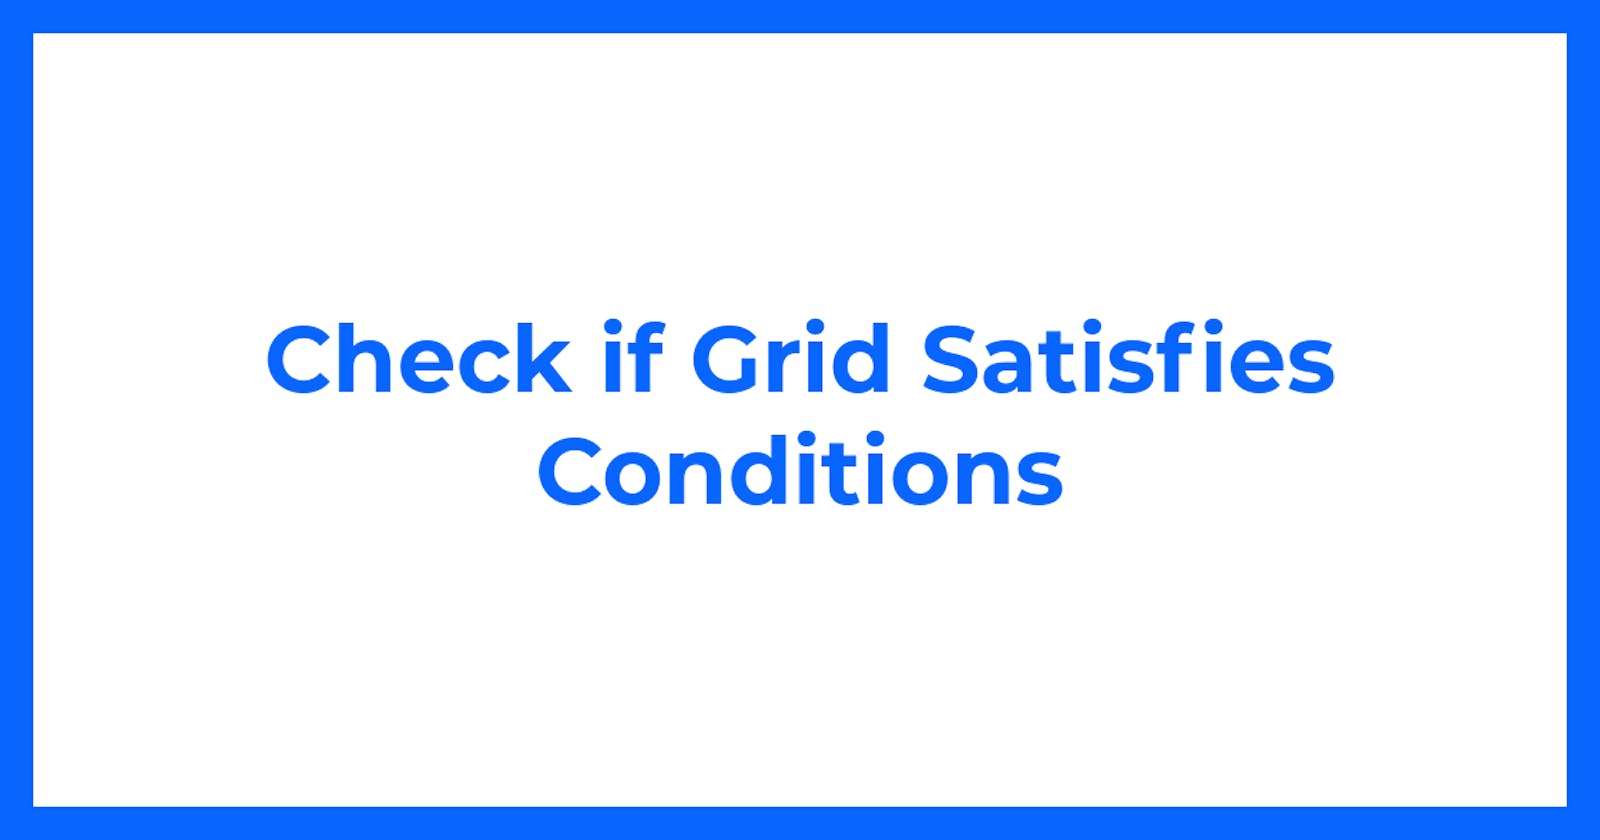 Check if Grid Satisfies Conditions